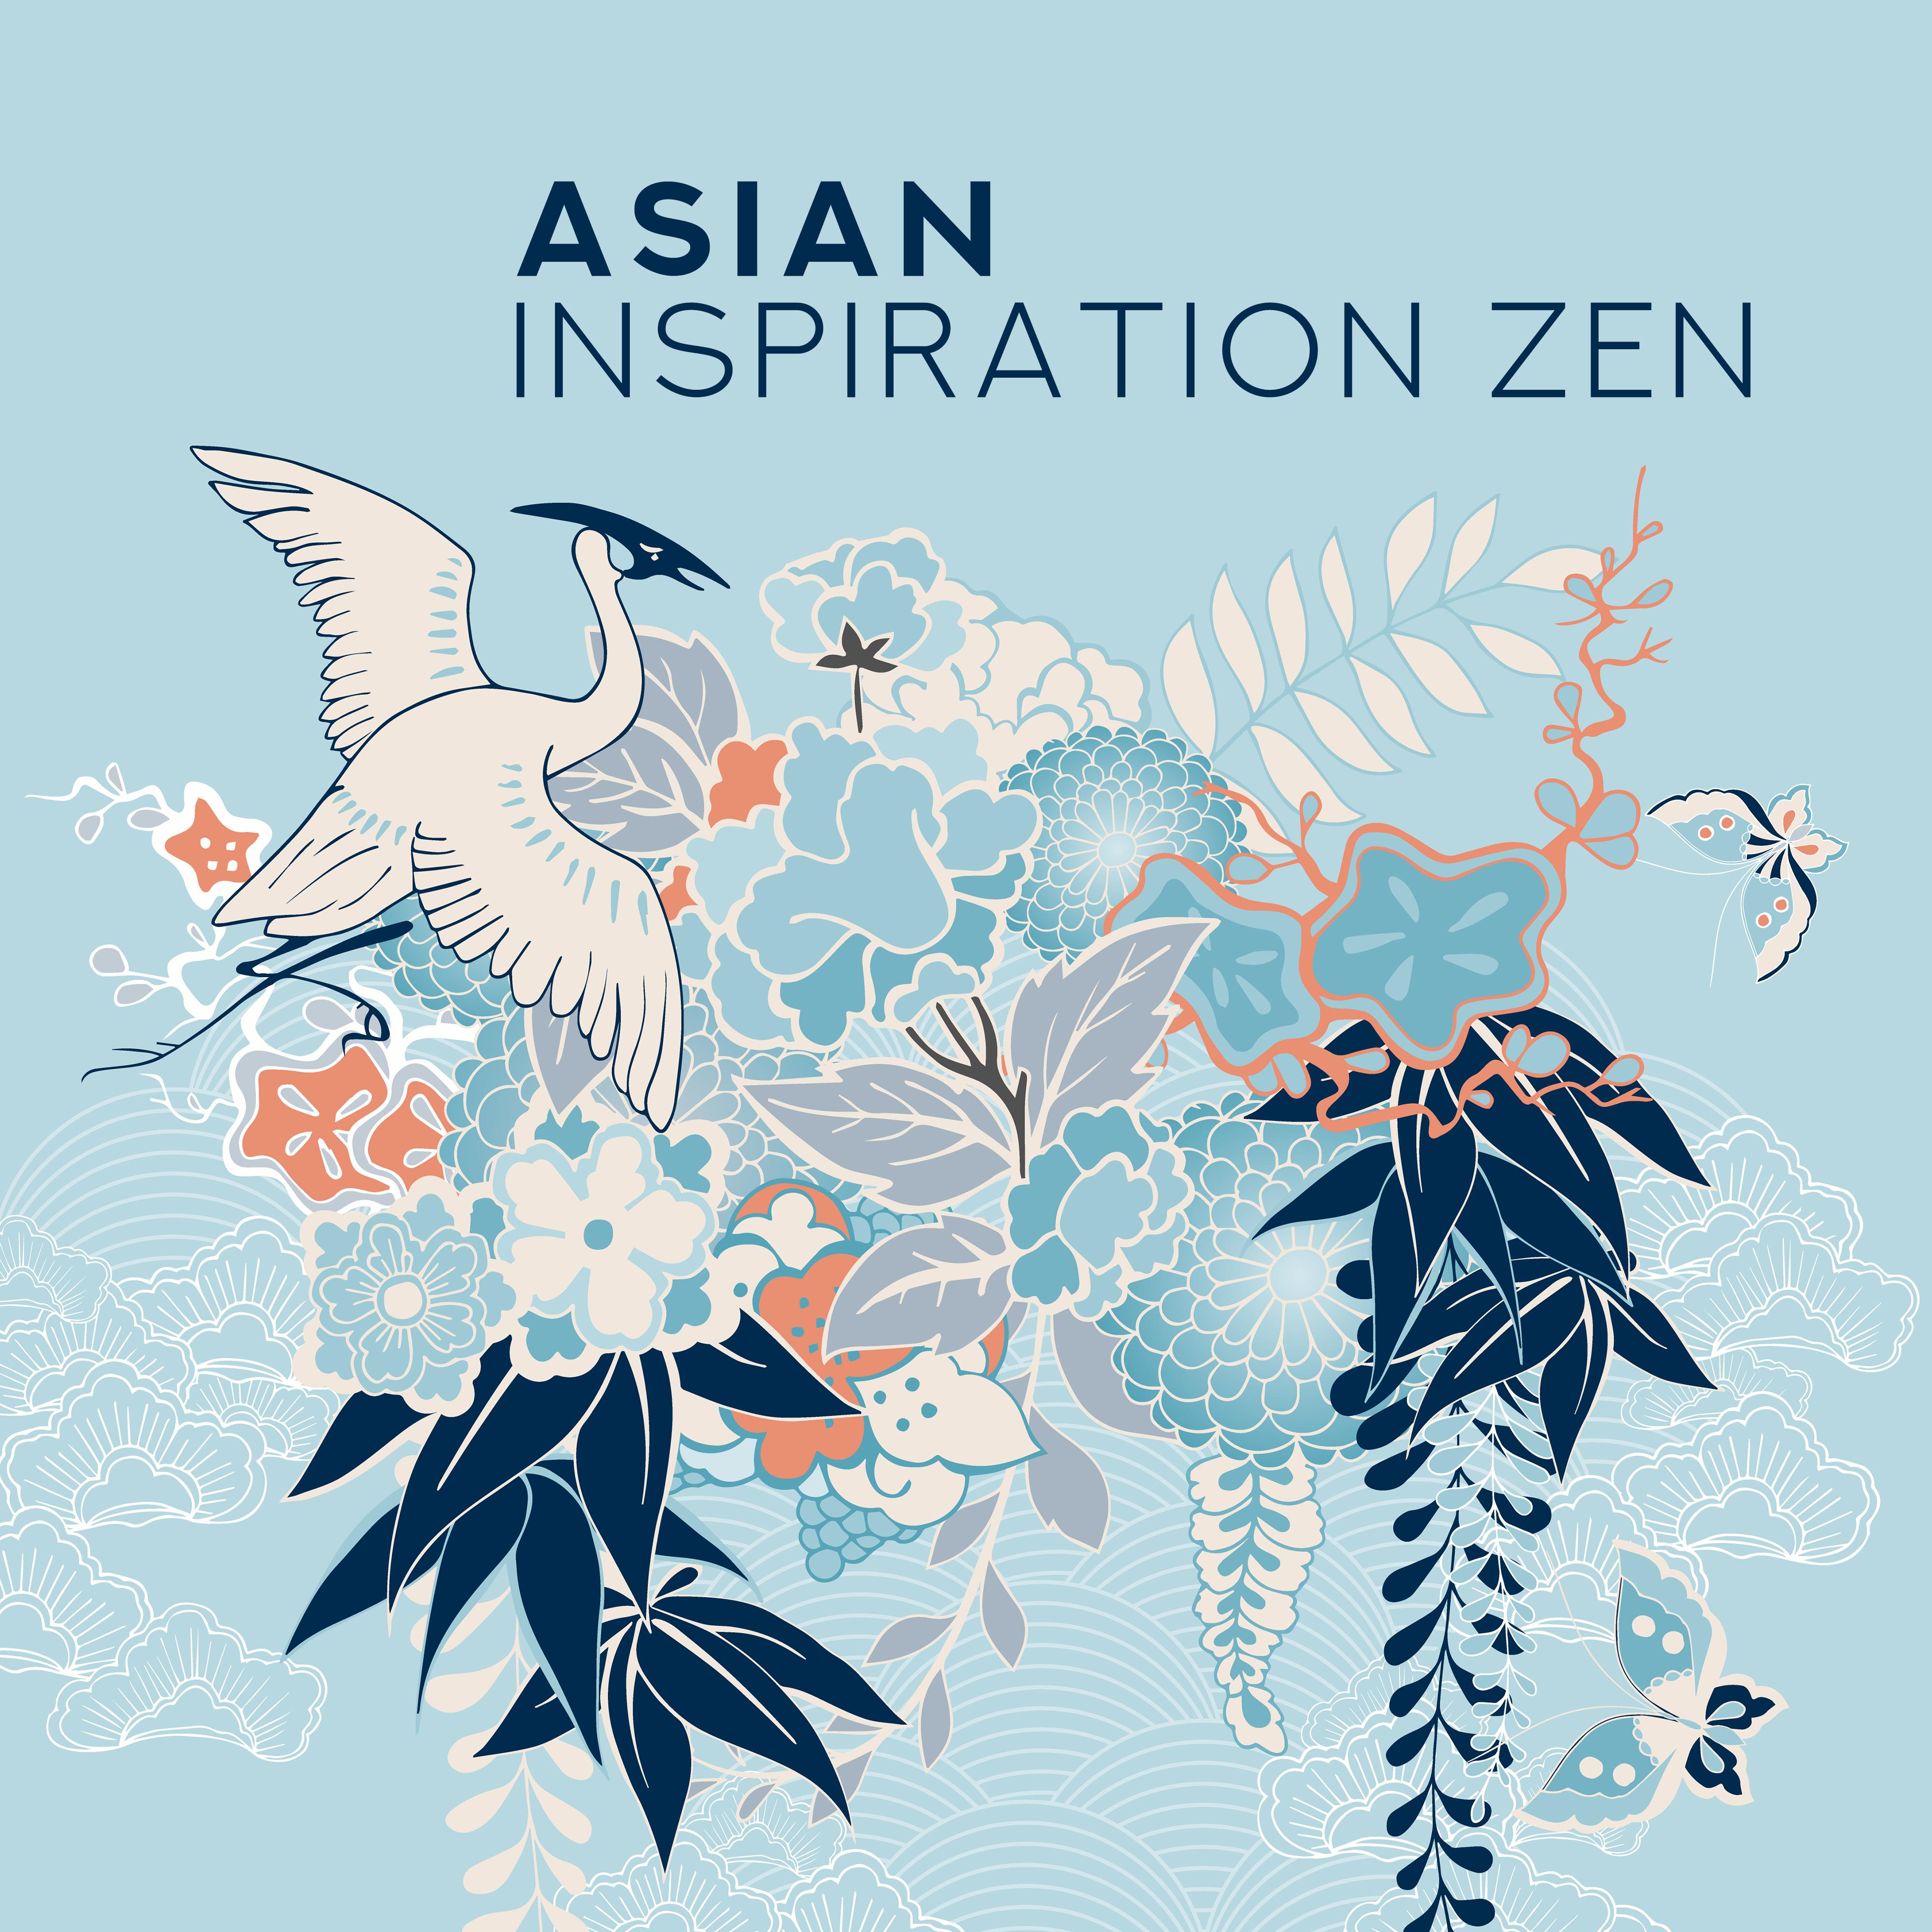 Asian Inspiration Zen: 2019 New Age Music Compilation, Oriental Melodies with Nature Sounds, Tracks Created for Deep Meditation & Relaxation, Zen Yoga, Chakra Balancing, Improve Inner Harmony & Energy